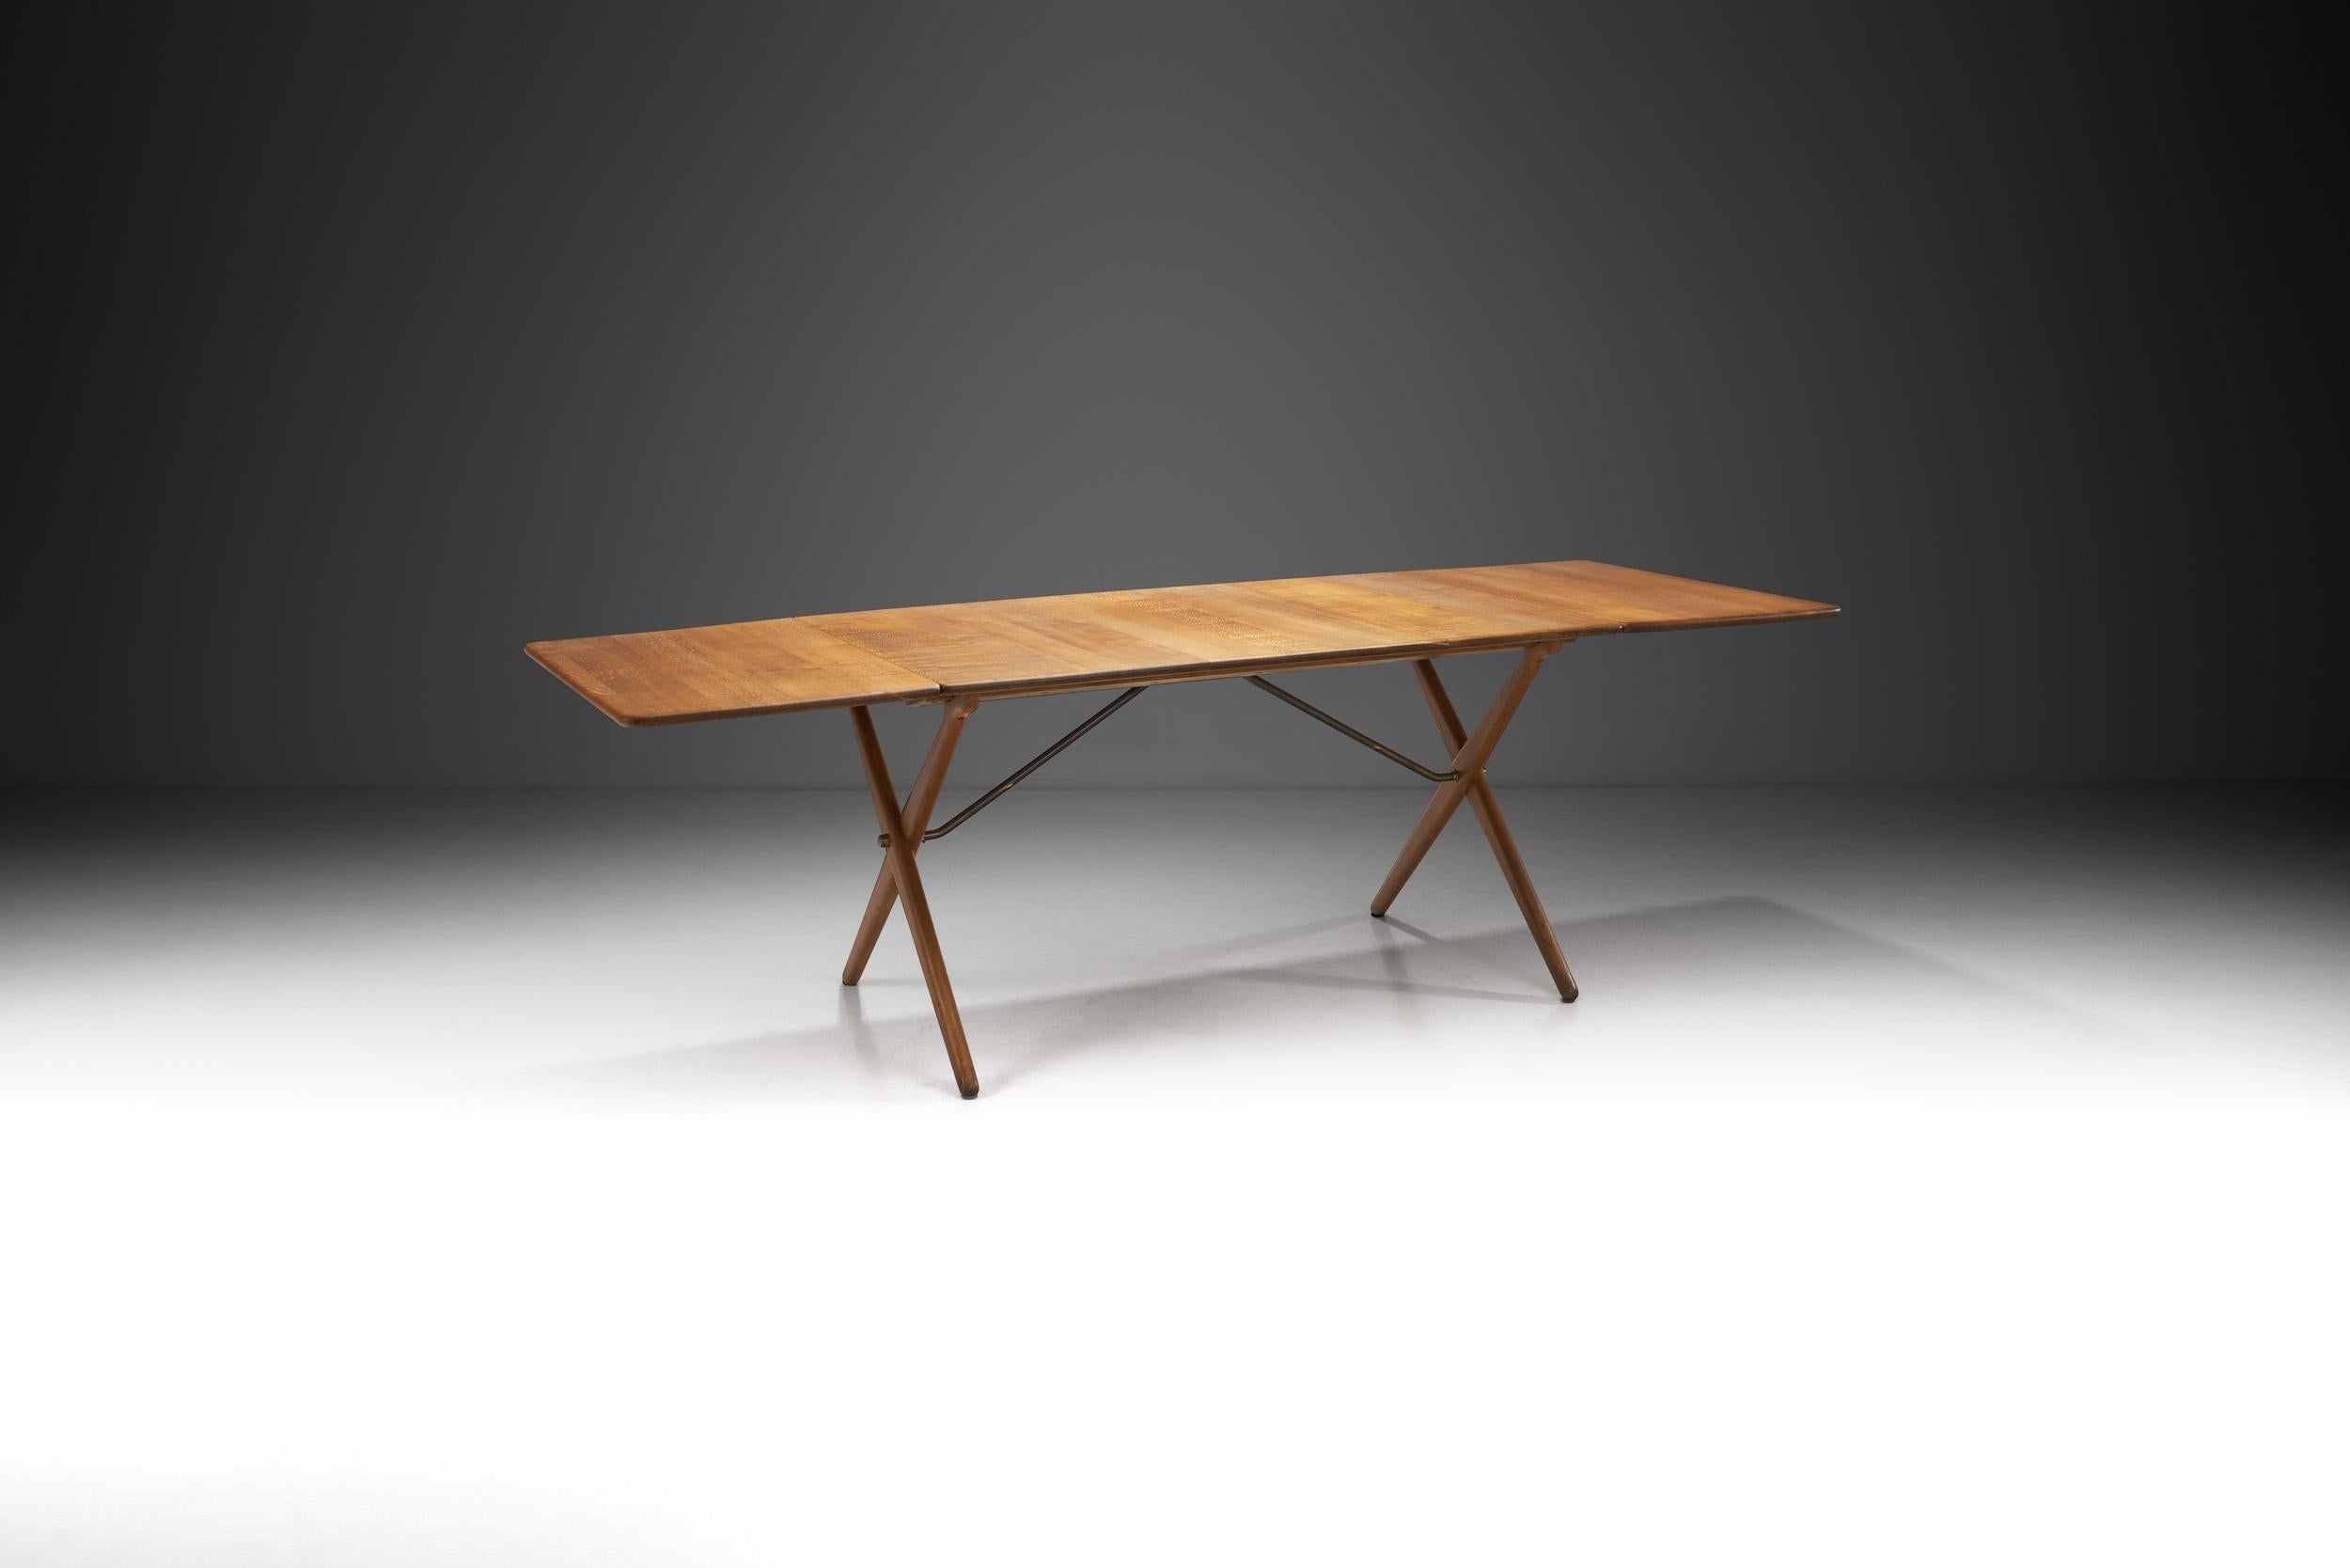 This rare “AT-309” dining table was designed by Hans Wegner in 1955 and its title of ‘iconic’ is well deserved. As it is no longer produced, this model has become a collector’s item created by a designer who is credited as one of the main driving